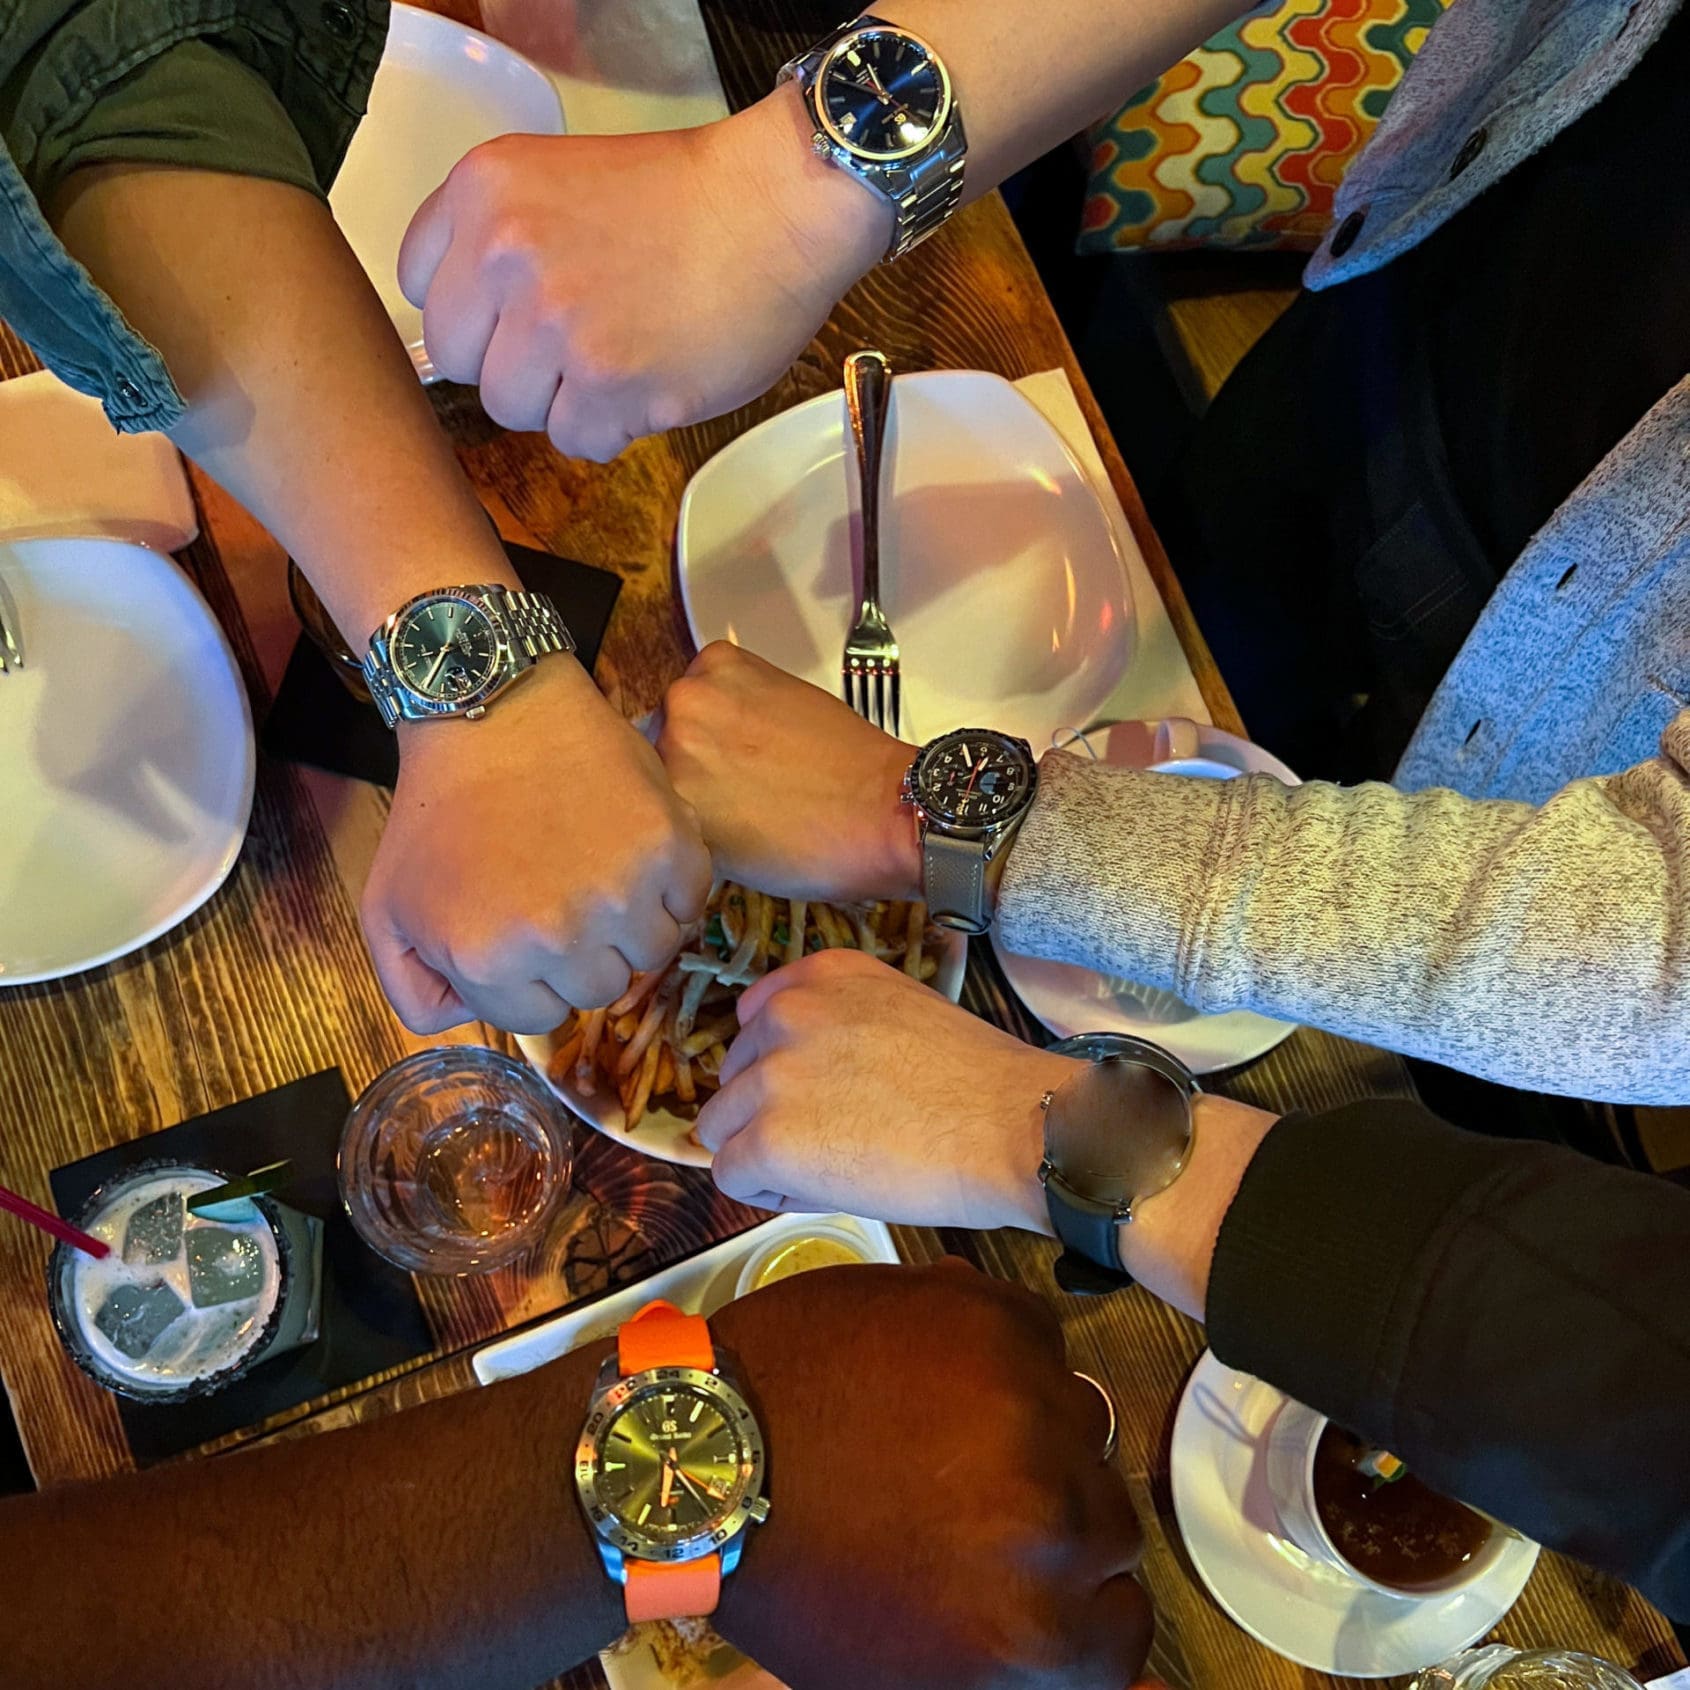 FRIDAY WIND DOWN: Nothing like a good ol’ impromptu watch meetup